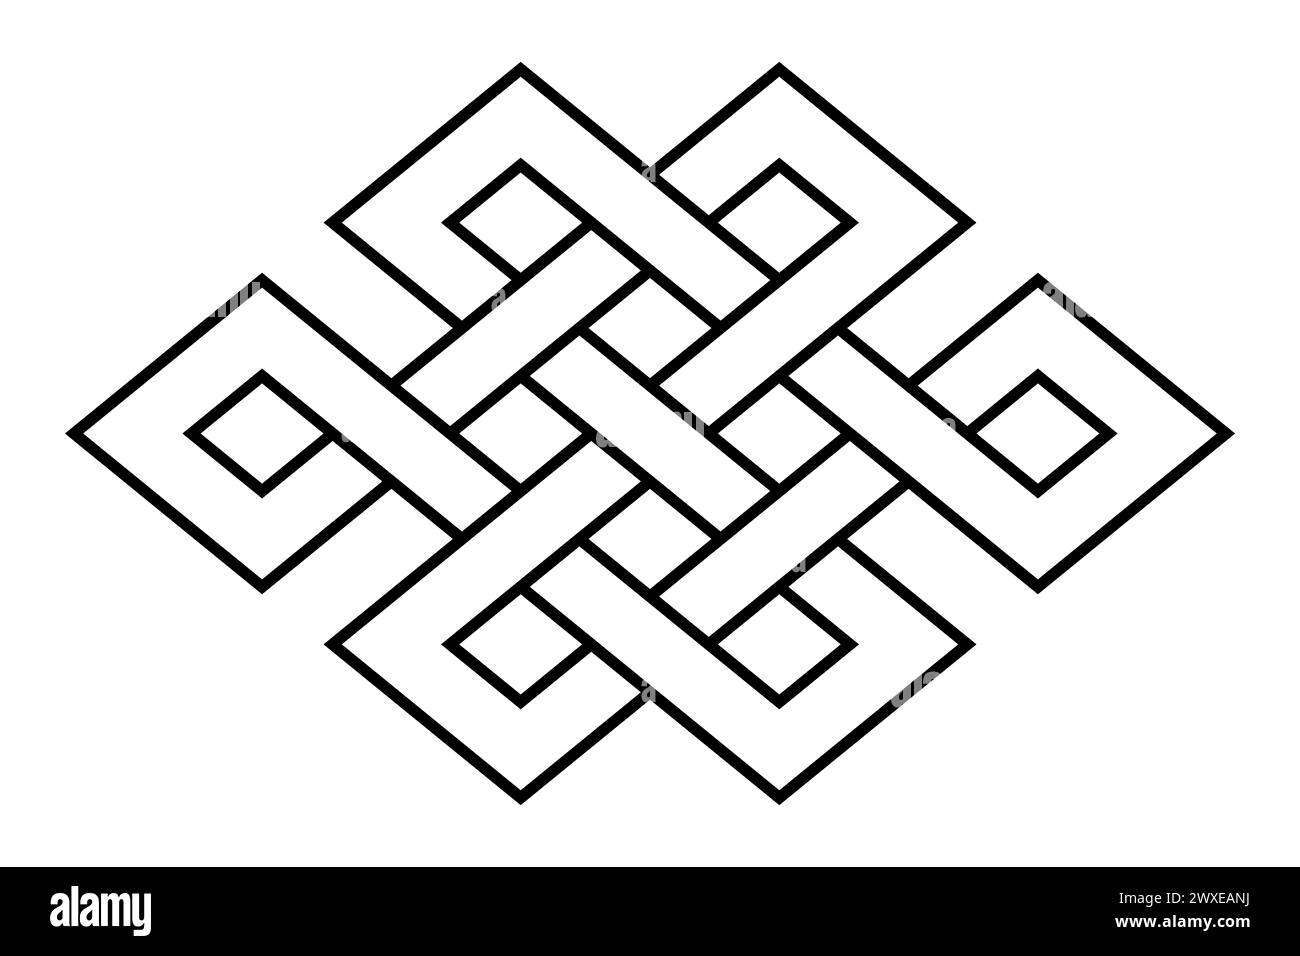 Endless knot, also known as eternal knot. Common form of an intertwining knot and one of eight Auspicious Symbols in Hinduism, Jainism and Buddhism. Stock Photo